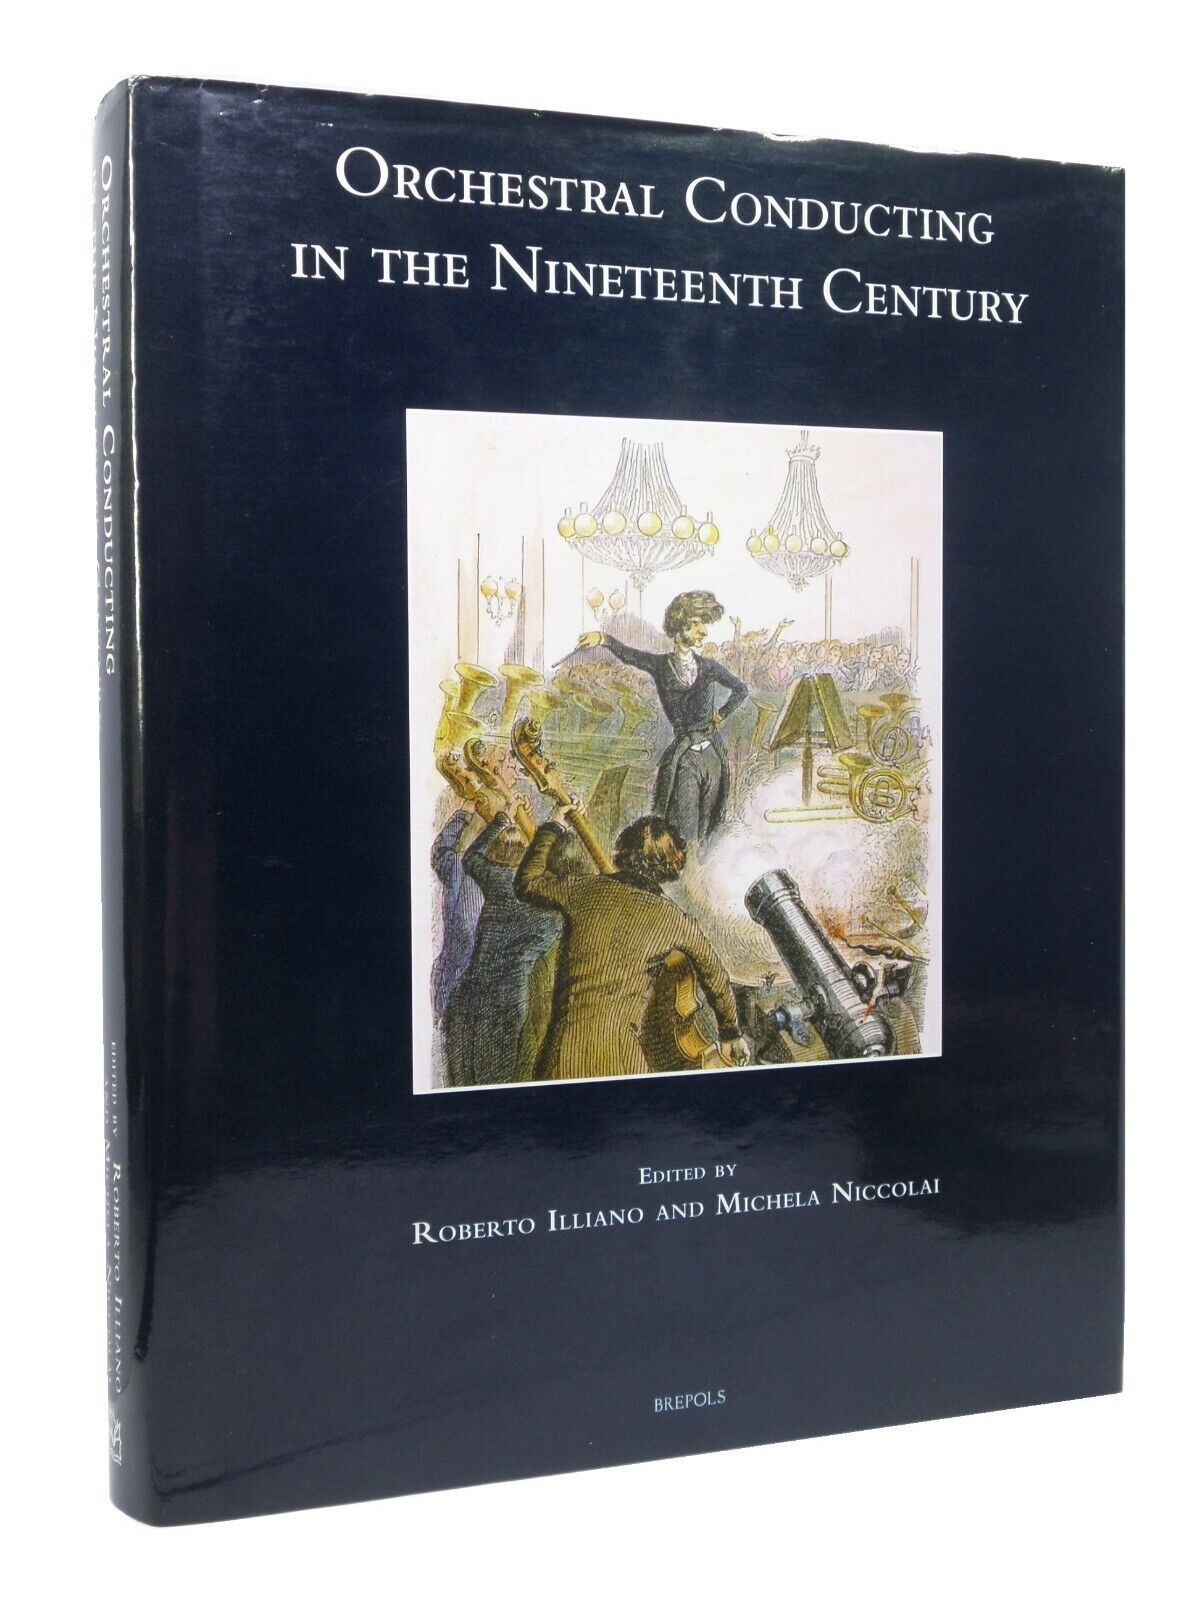 ORCHESTRAL CONDUCTING IN THE NINETEENTH CENTURY 2014 HARDCOVER